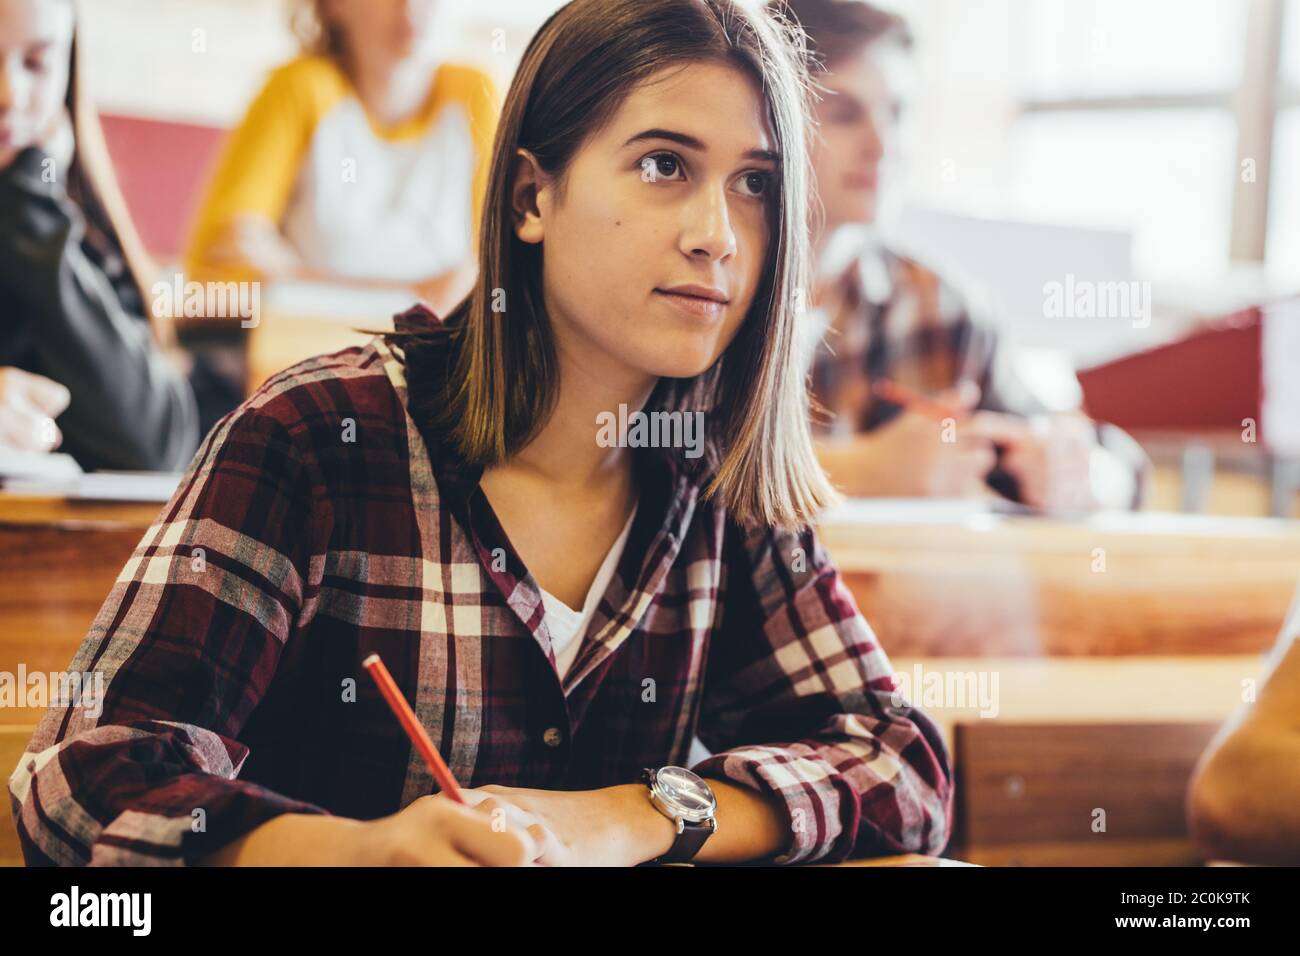 Beautiful teenage girl during a lecture in classroom. Female student paying attention in class and making notes. Stock Photo